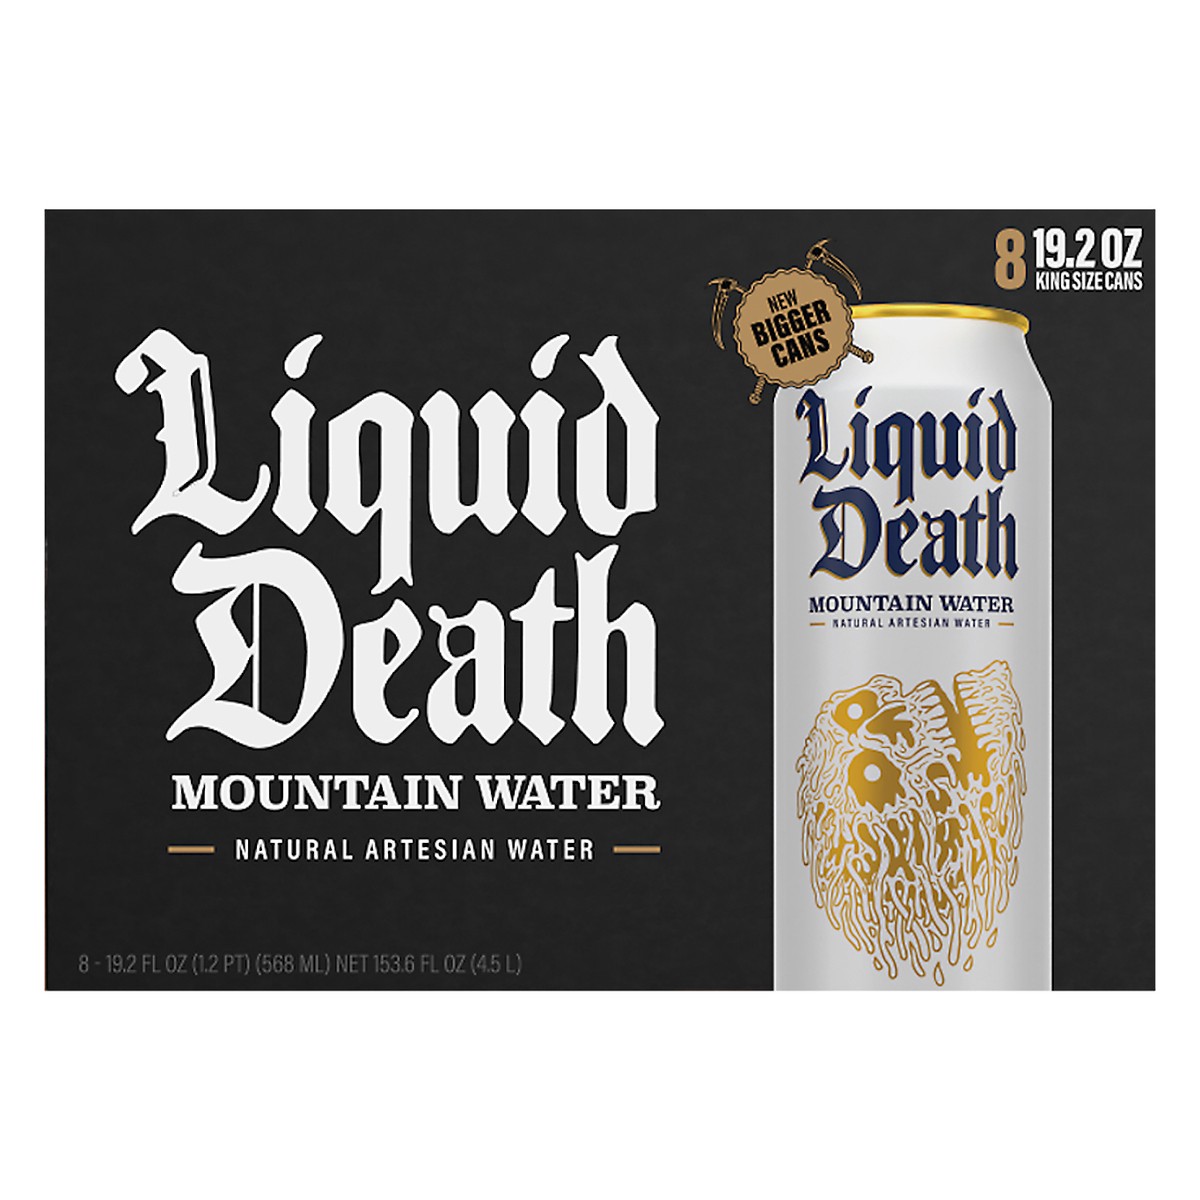 slide 1 of 9, Liquid Death Mountain Water, 19.2 oz King Size Cans (8-Pack), 8 ct